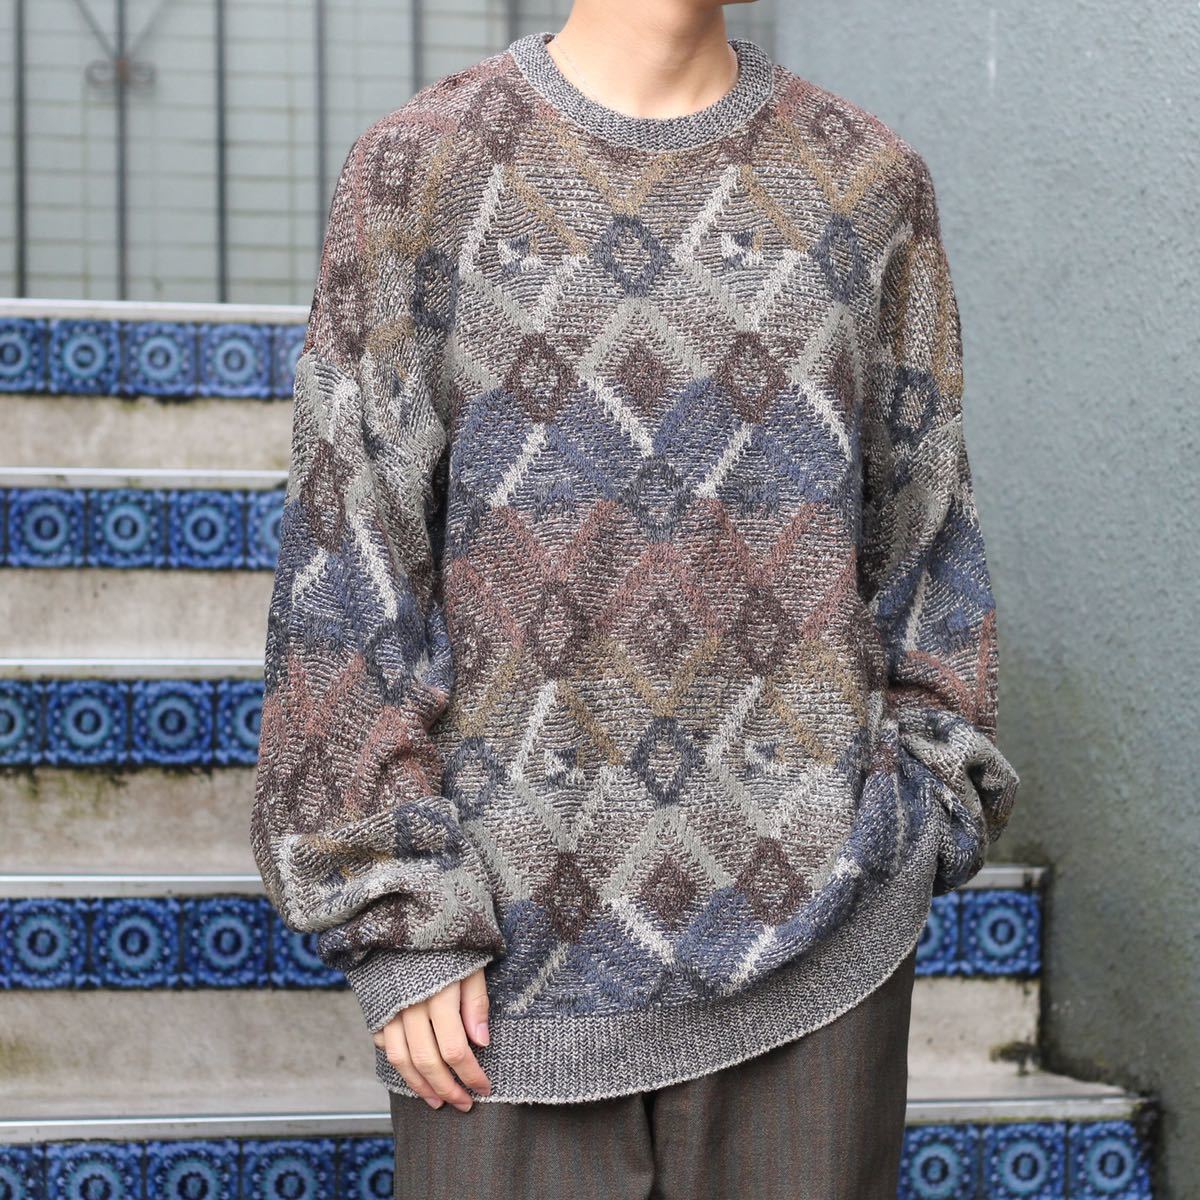 USA VINTAGE PATTERNED DESIGN OVER KNIT/アメリカ古着柄デザイン